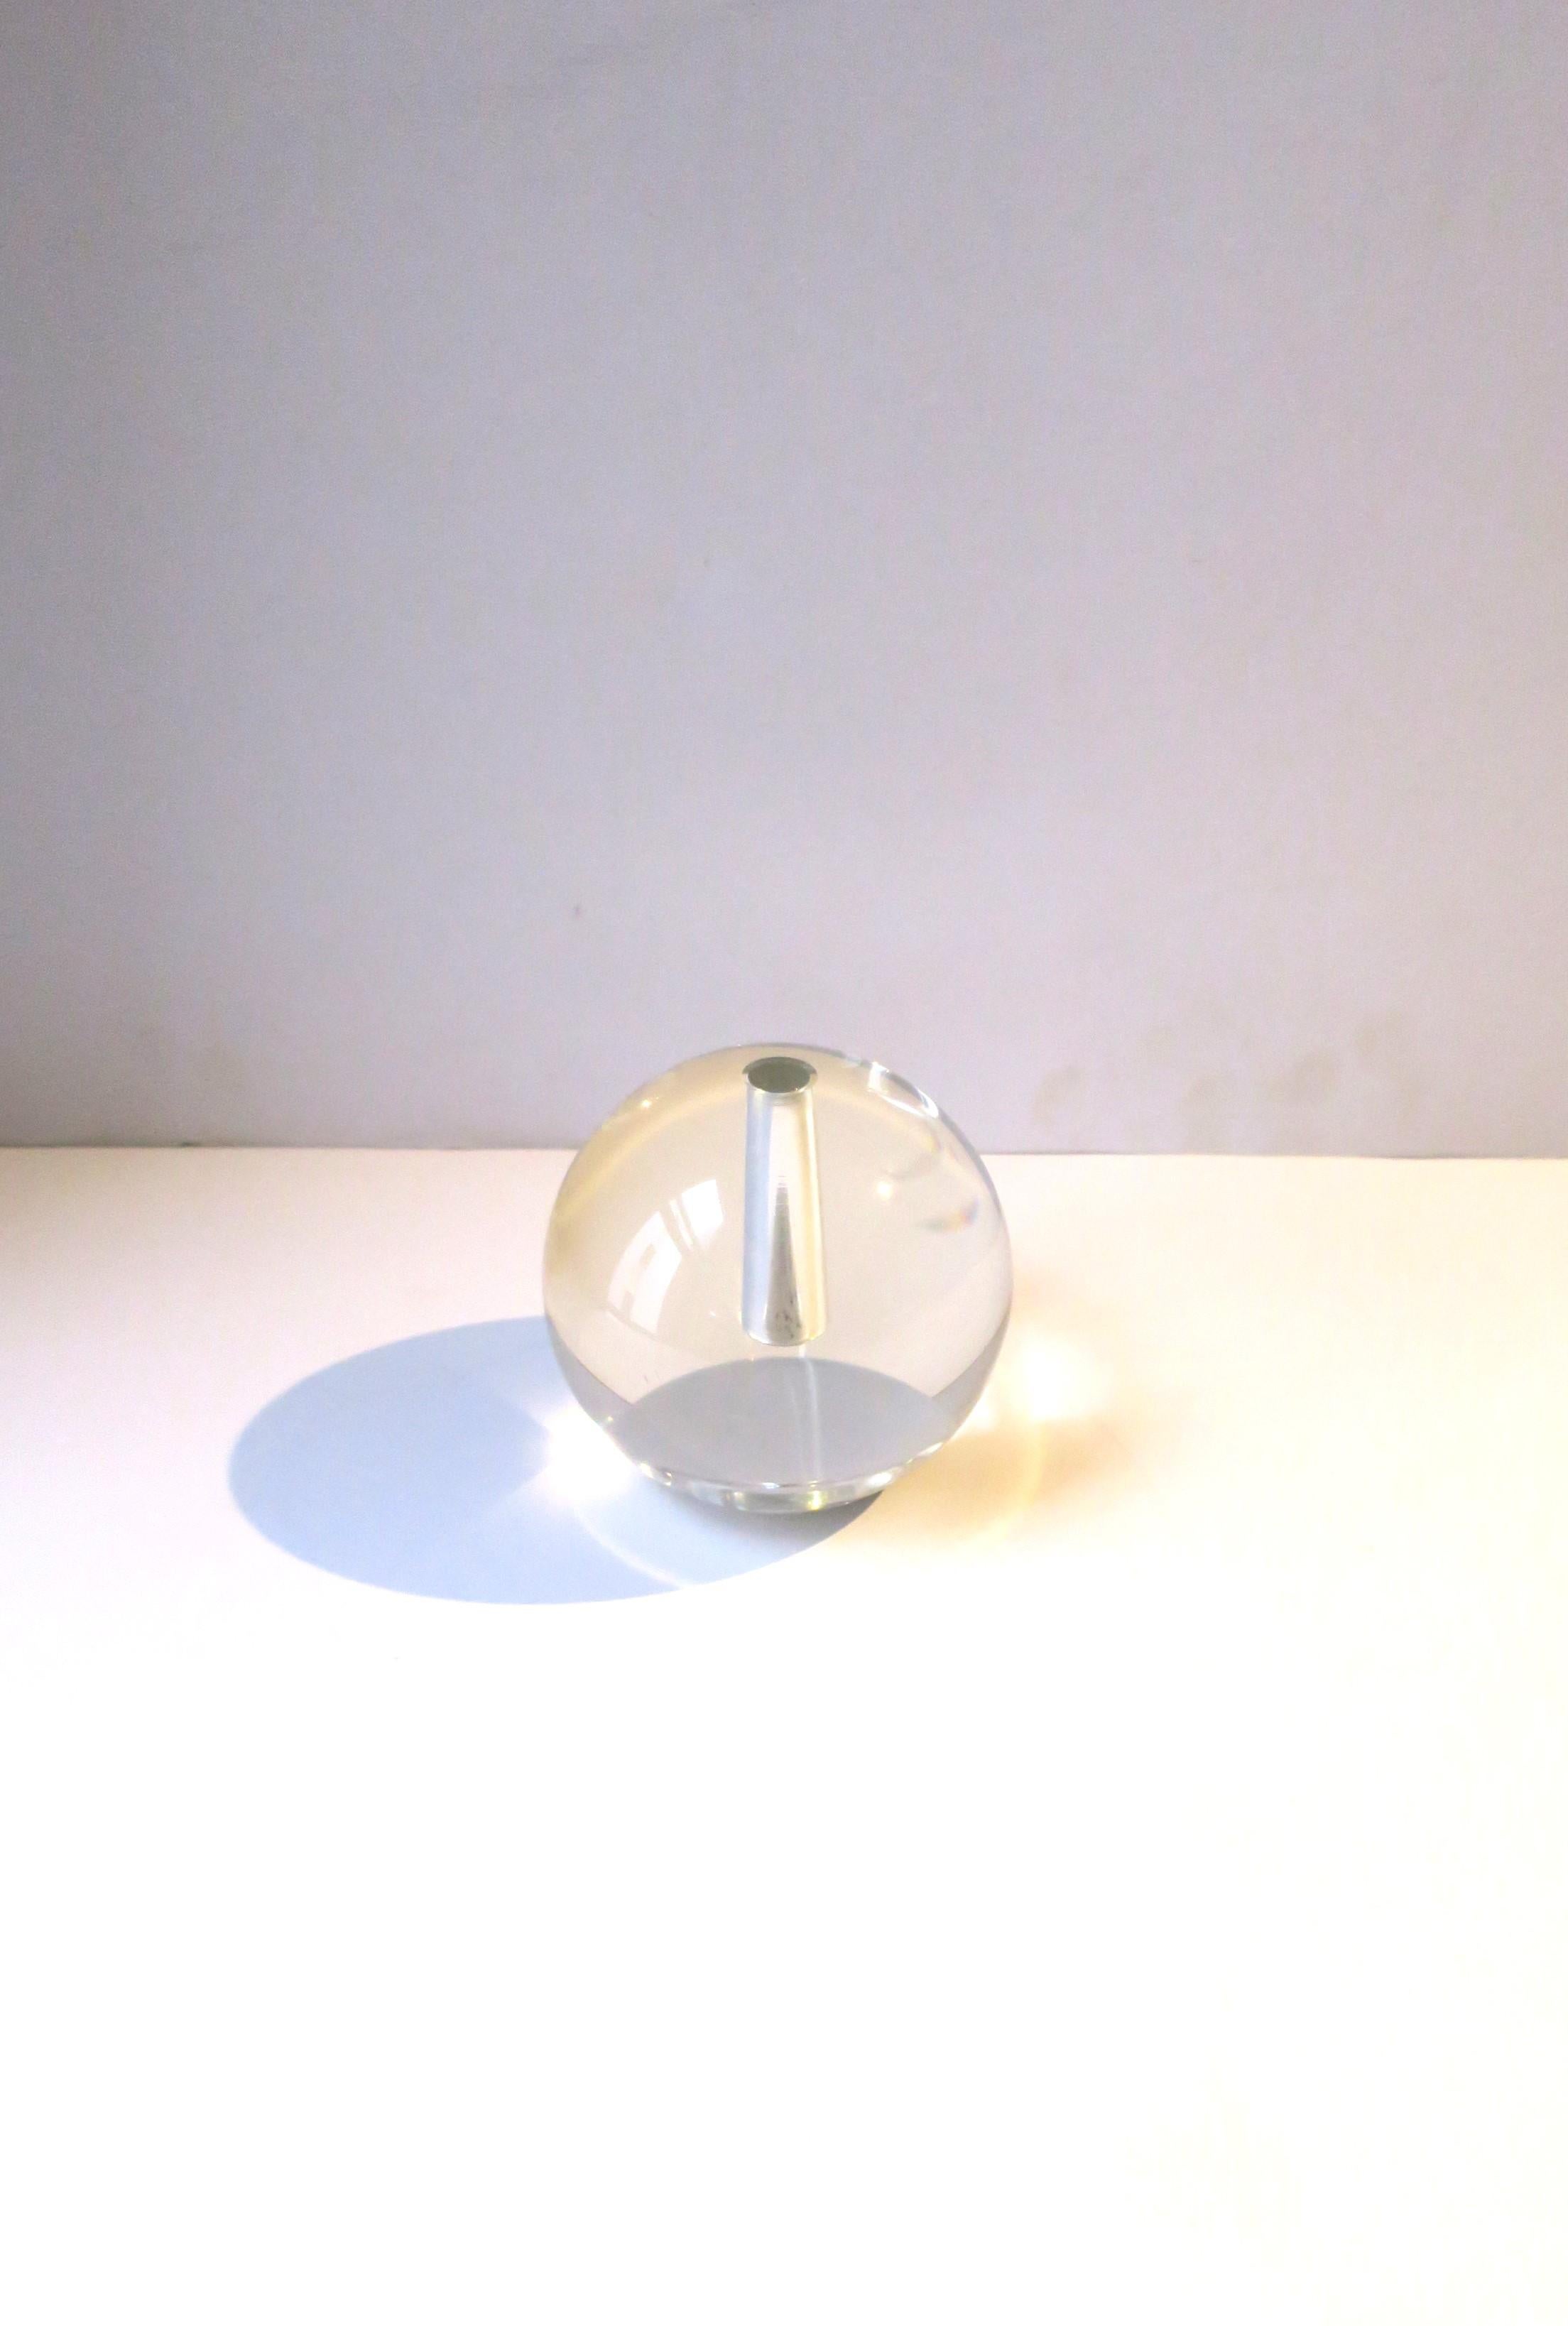 A substantial crystal ball sphere bud vase in the style of Baccara, in the modern or minimalist style. Beautiful as a standalone piece or for a single flower. Very good condition as shown in images. No chips noted. Dimensions: 3.75